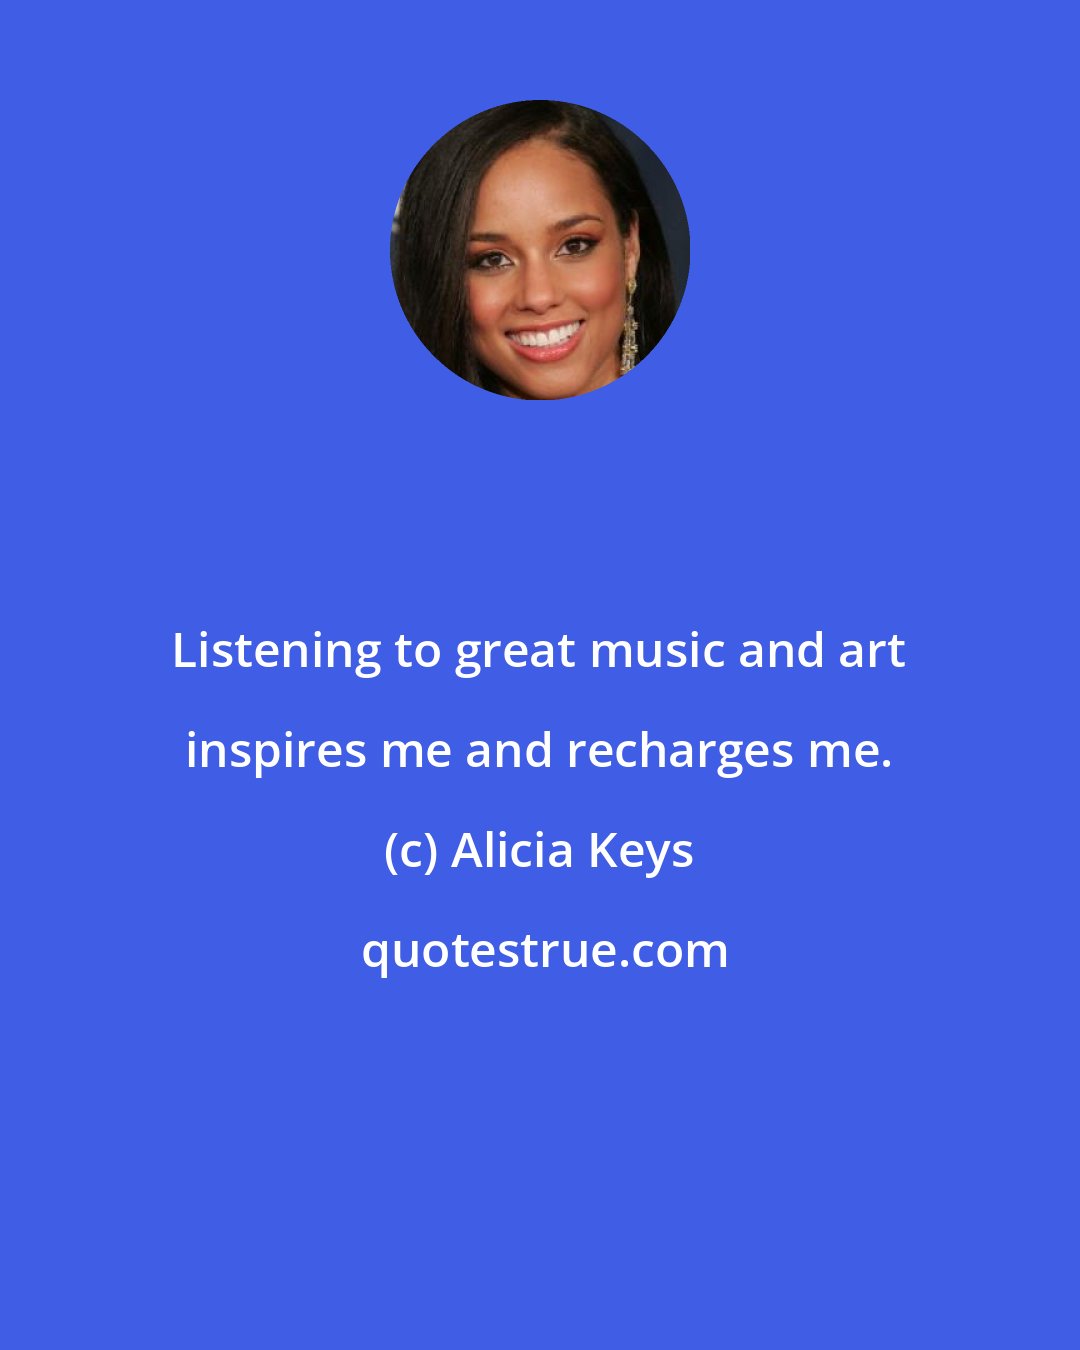 Alicia Keys: Listening to great music and art inspires me and recharges me.